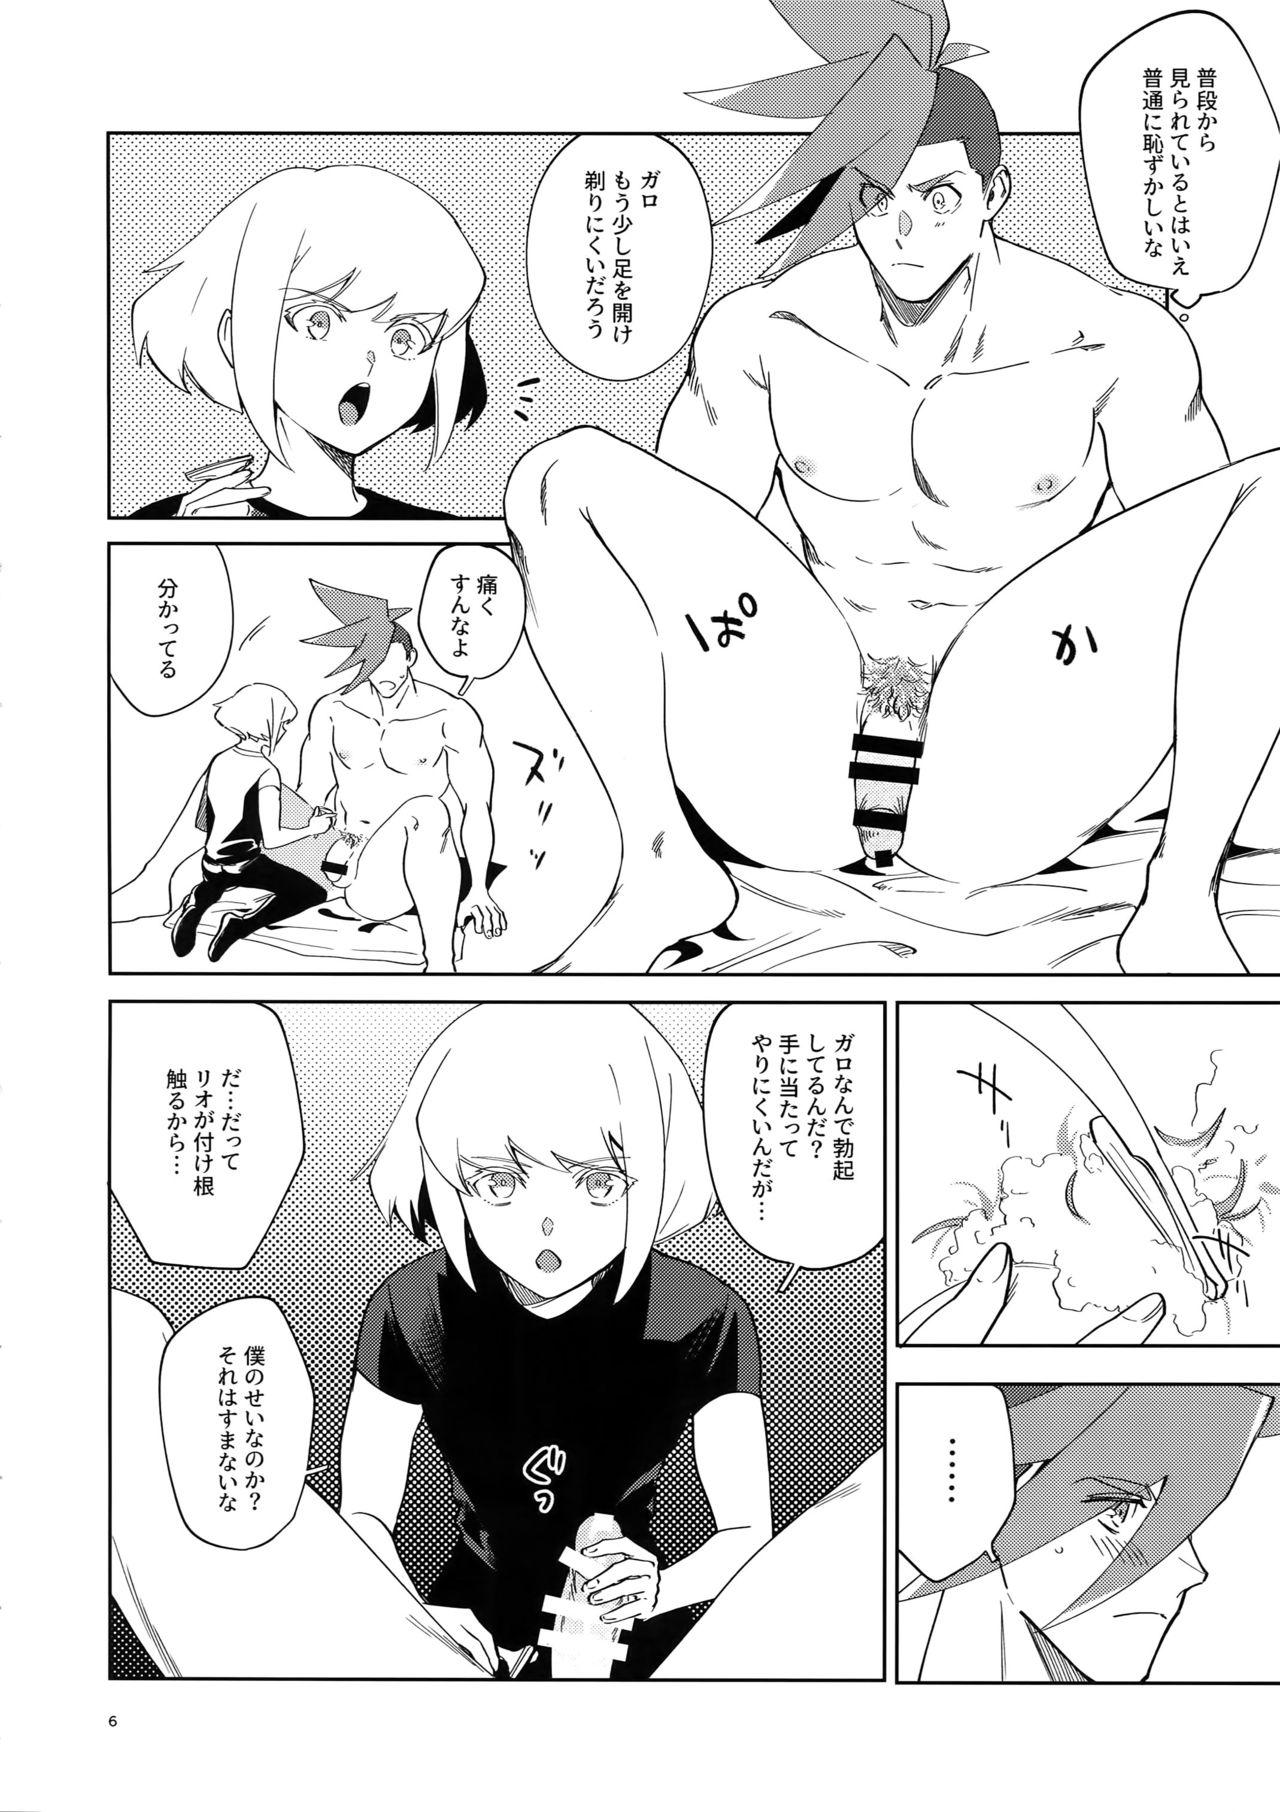 Menage One and Only - Promare Czech - Page 5